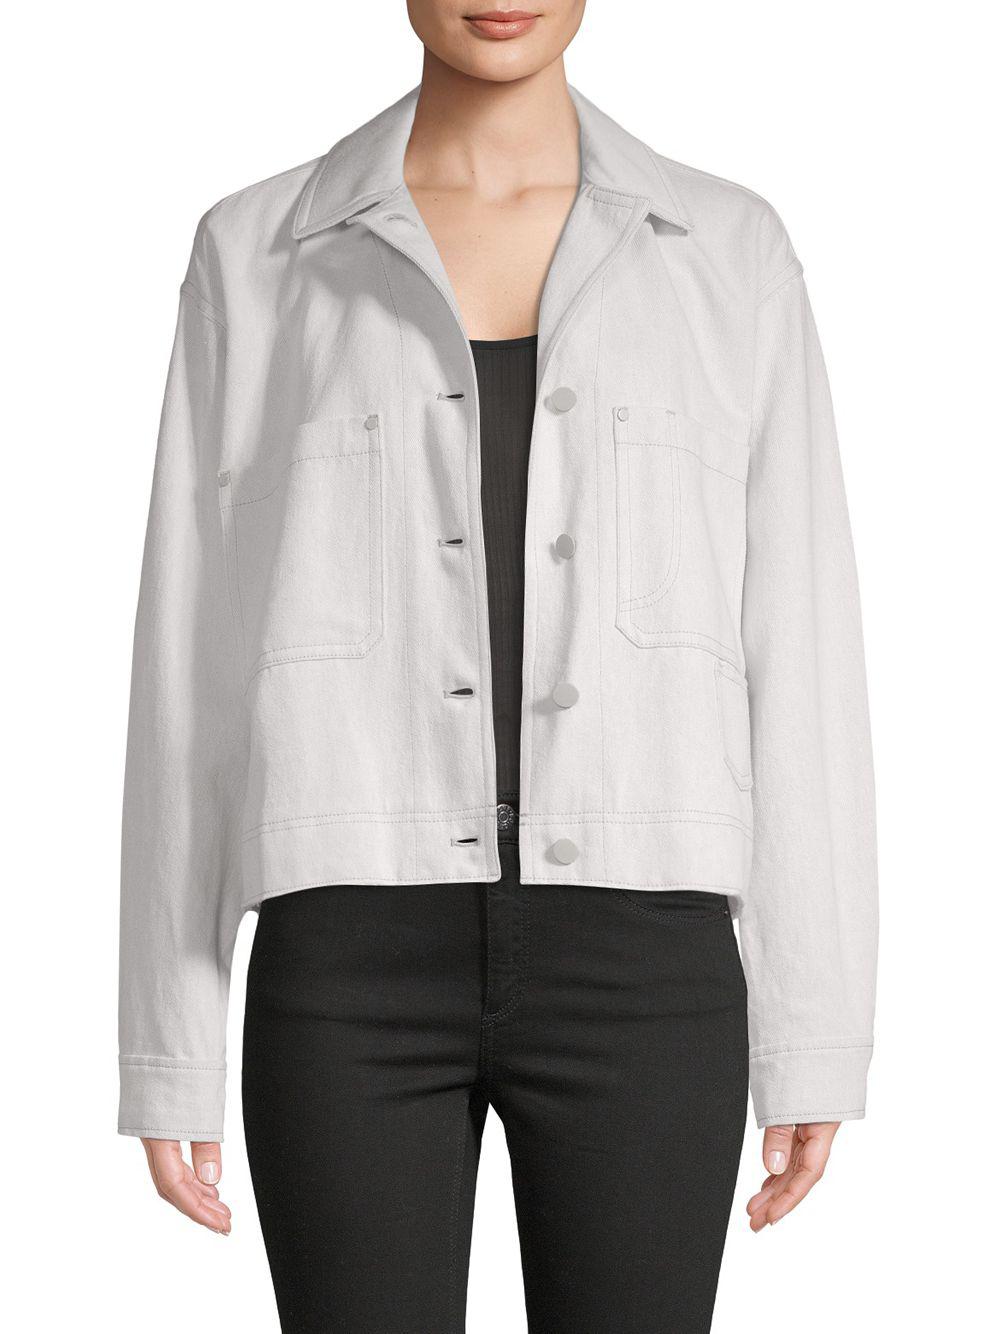 Vince Cotton & Linen Cropped Utility Jacket in Chalk (White) - Lyst